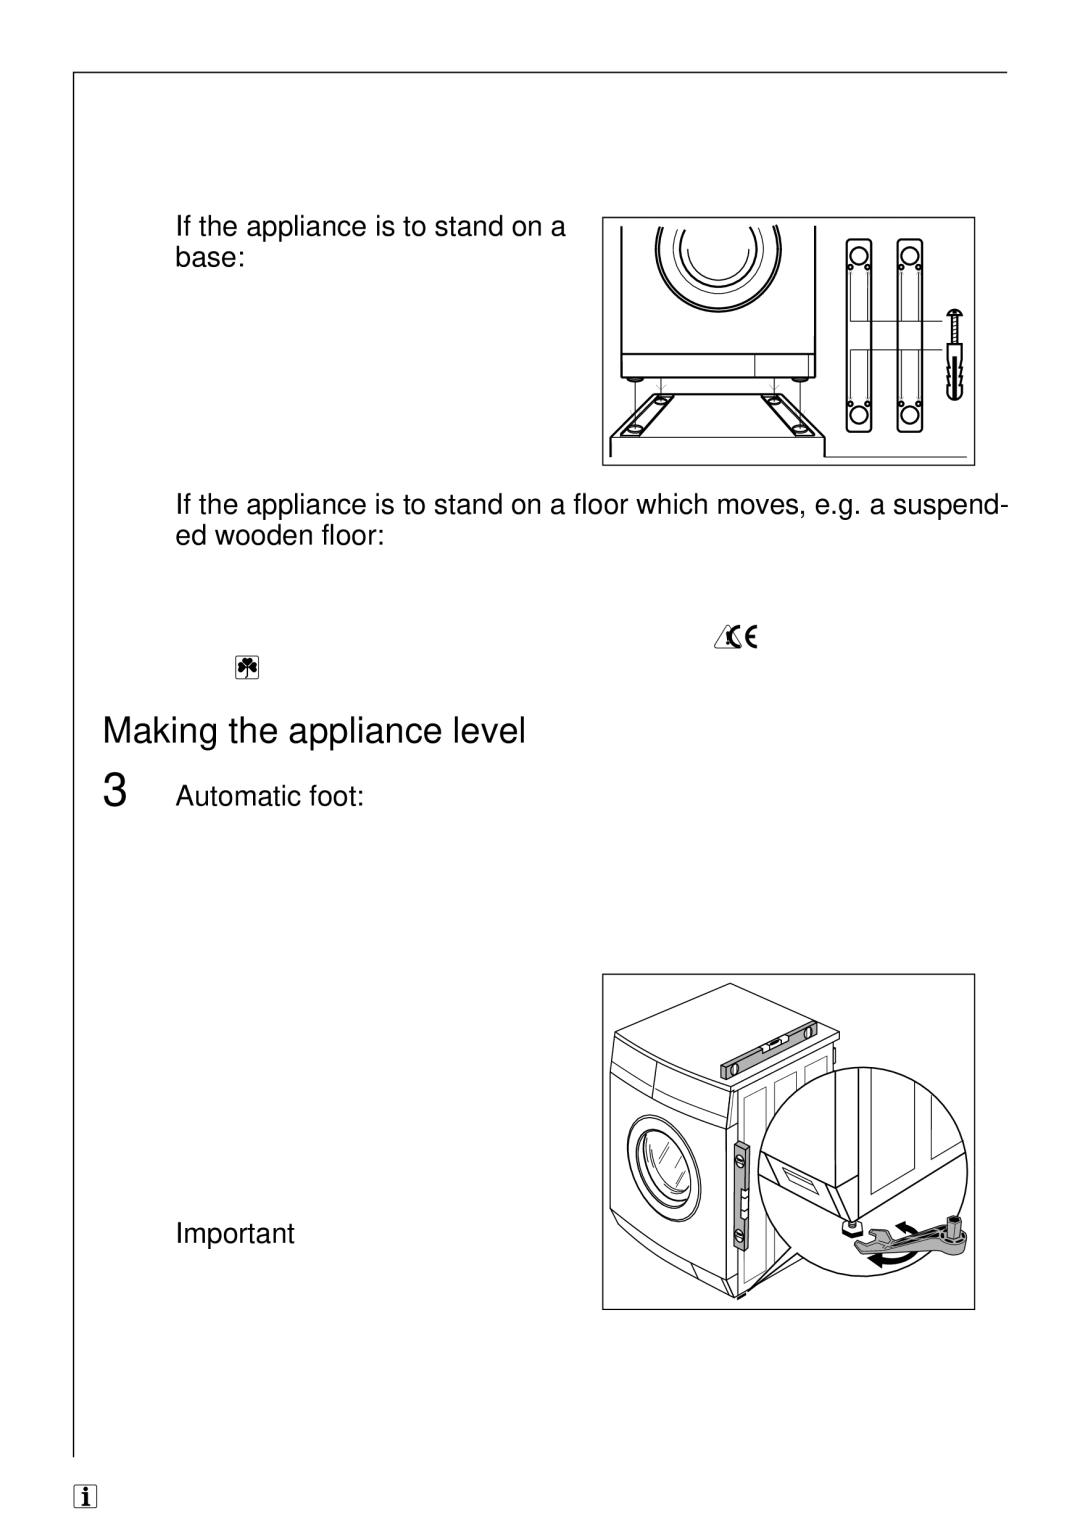 Electrolux 88810 manual Making the appliance level, If the appliance is to stand on a base 